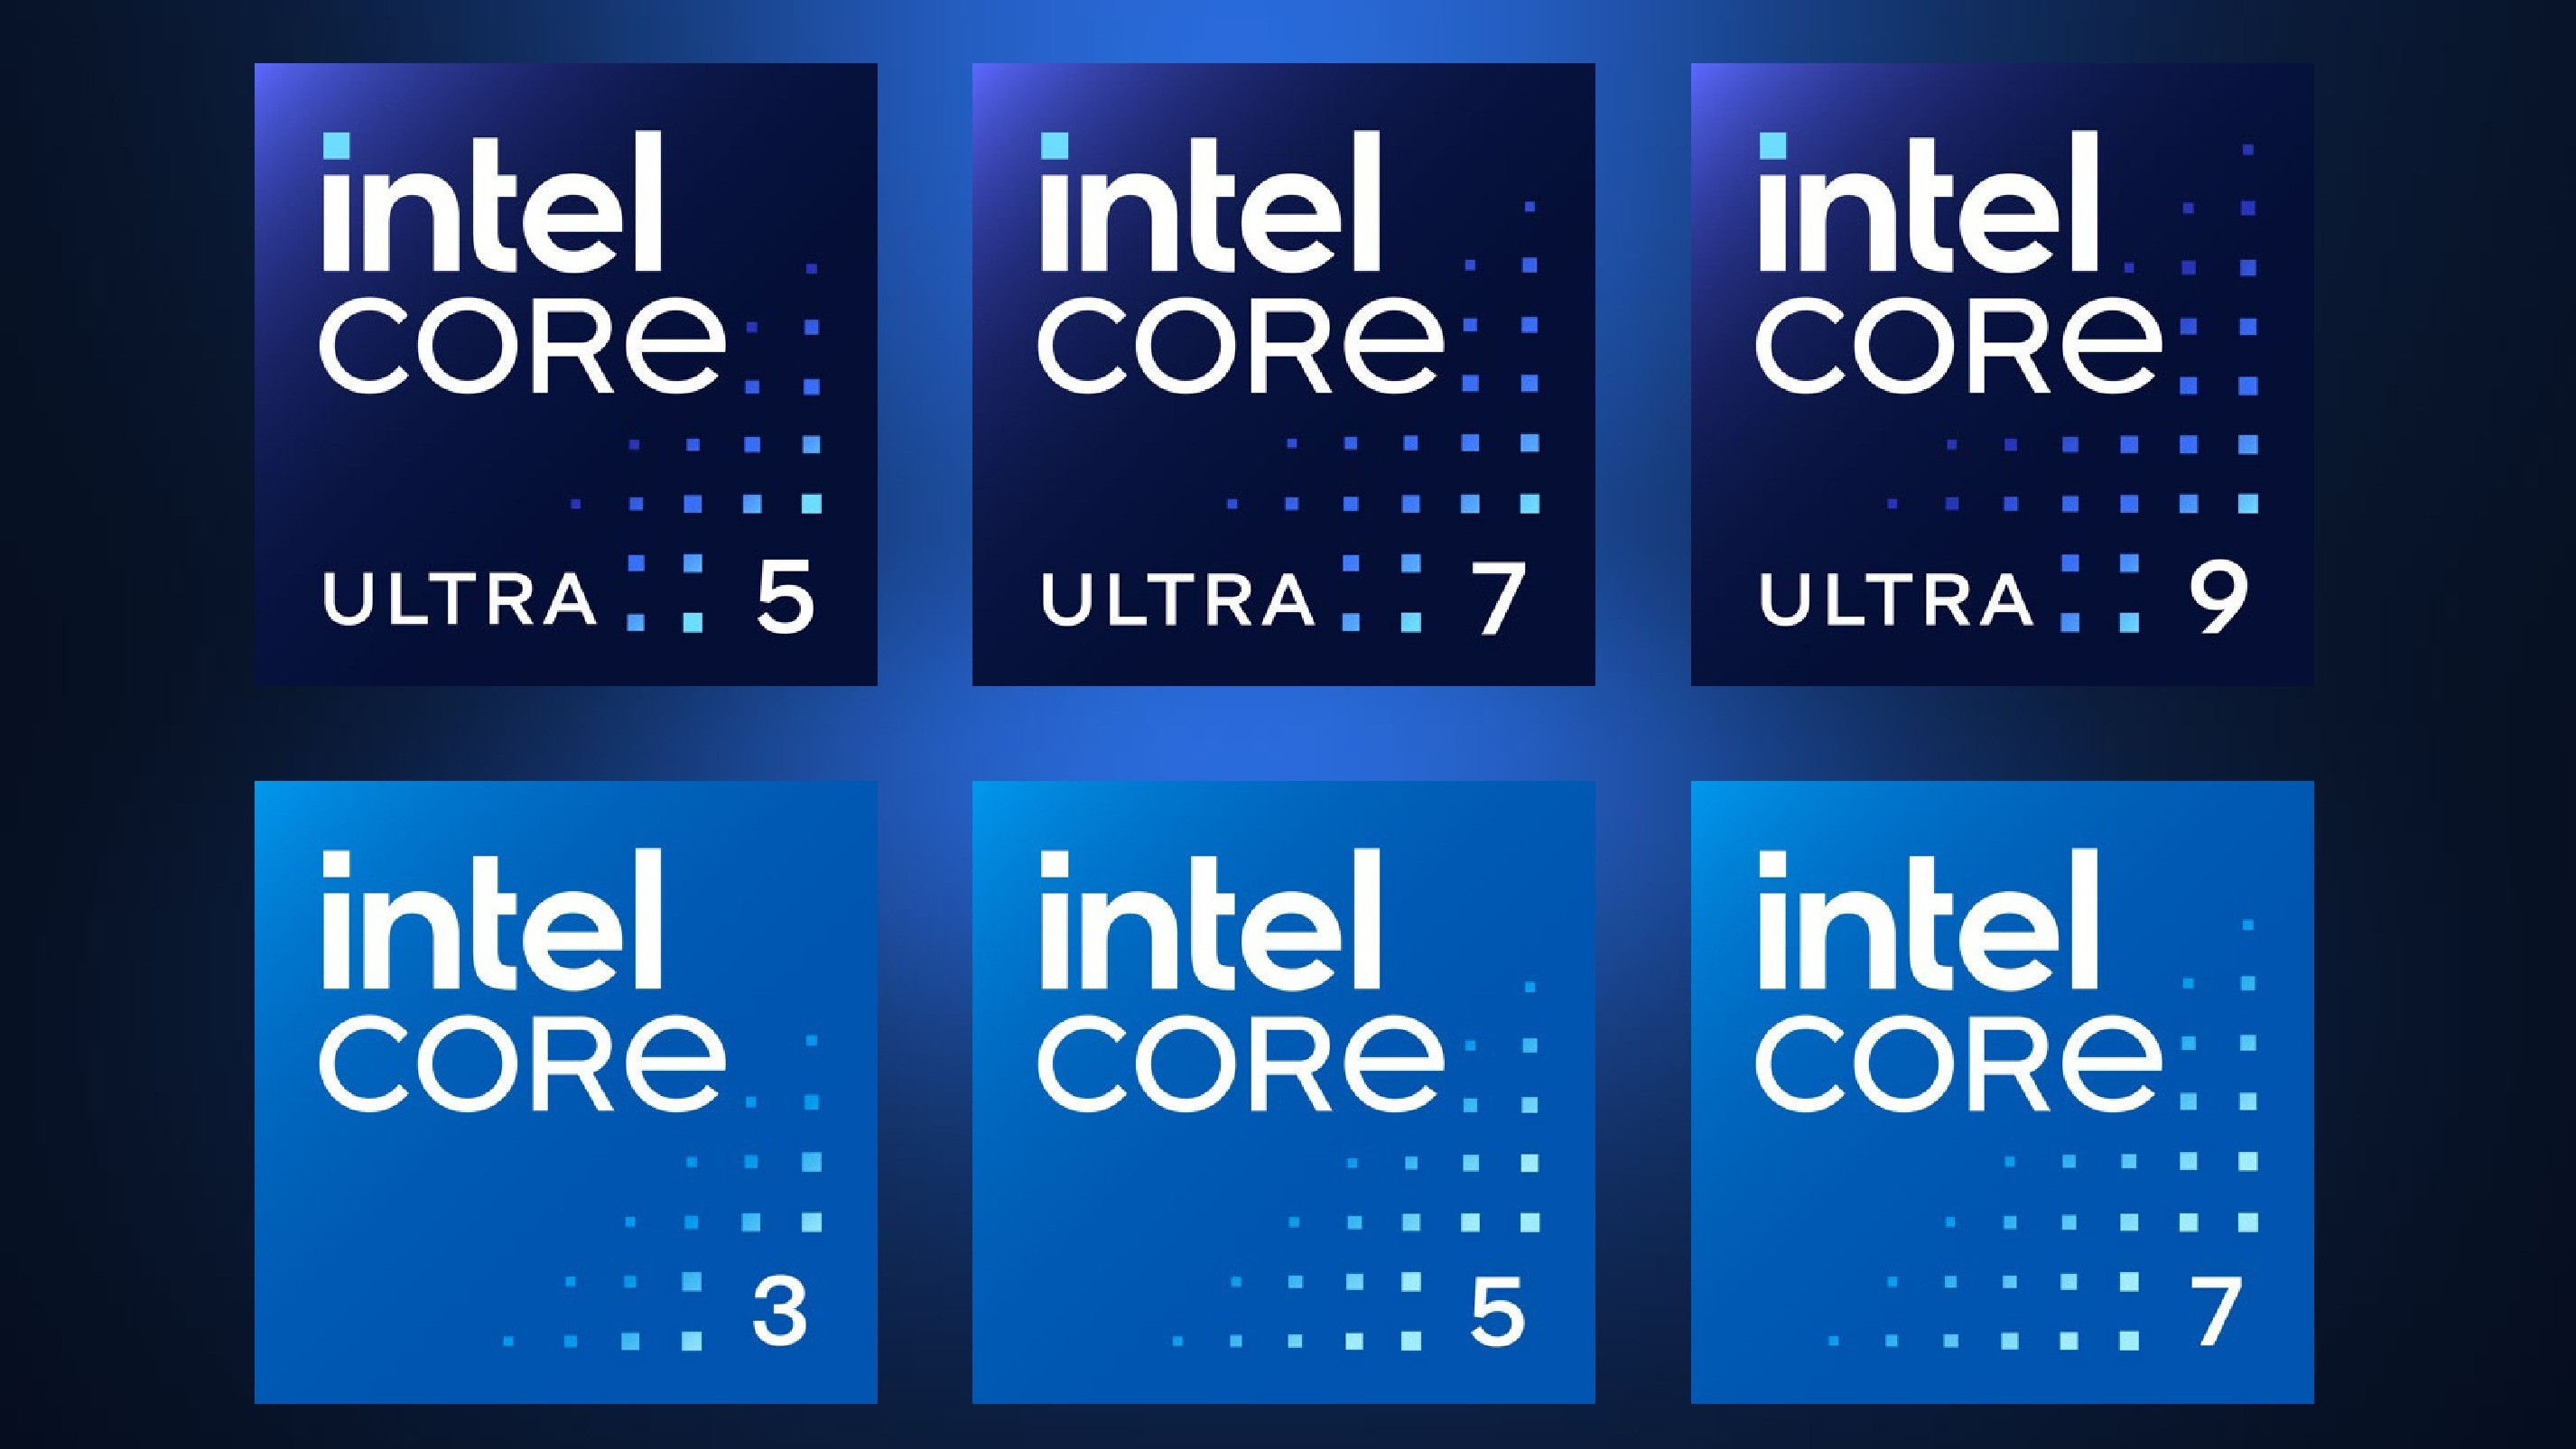 Intel Core i9-14900 non-K CPU: 8 cores, 16 threads @ up to 5.8GHz